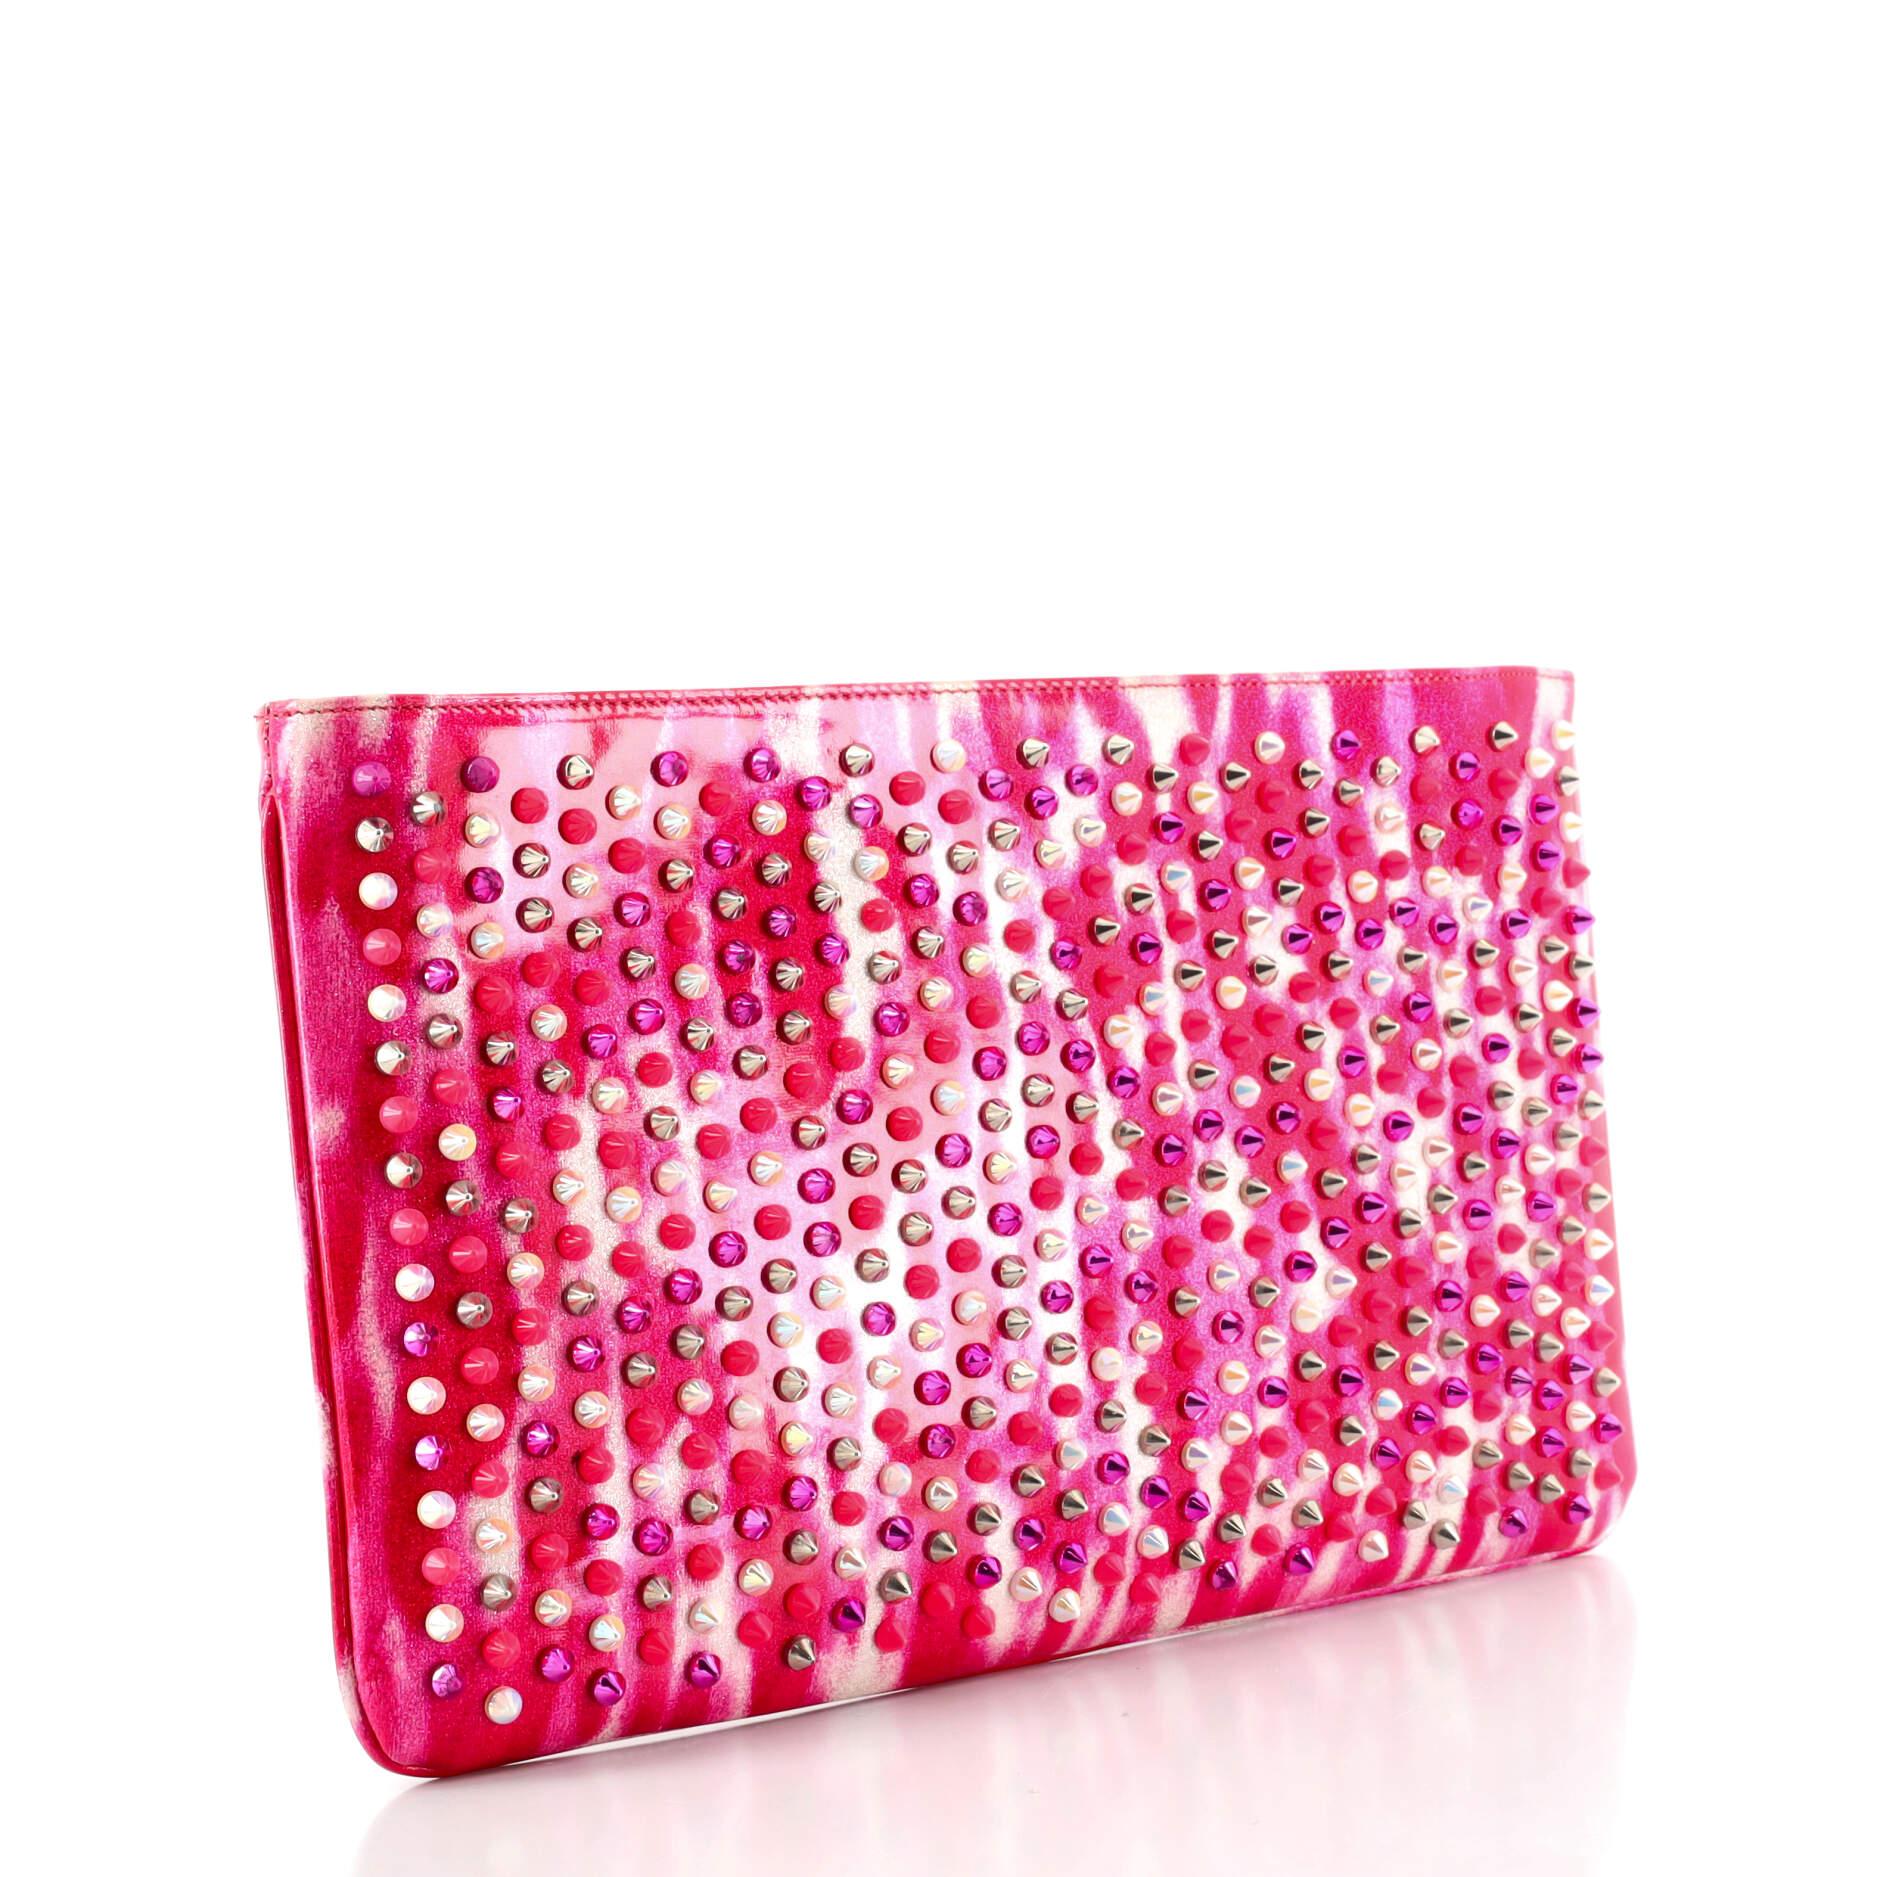 Red Christian Louboutin Loubiposh Clutch Printed Spiked Patent